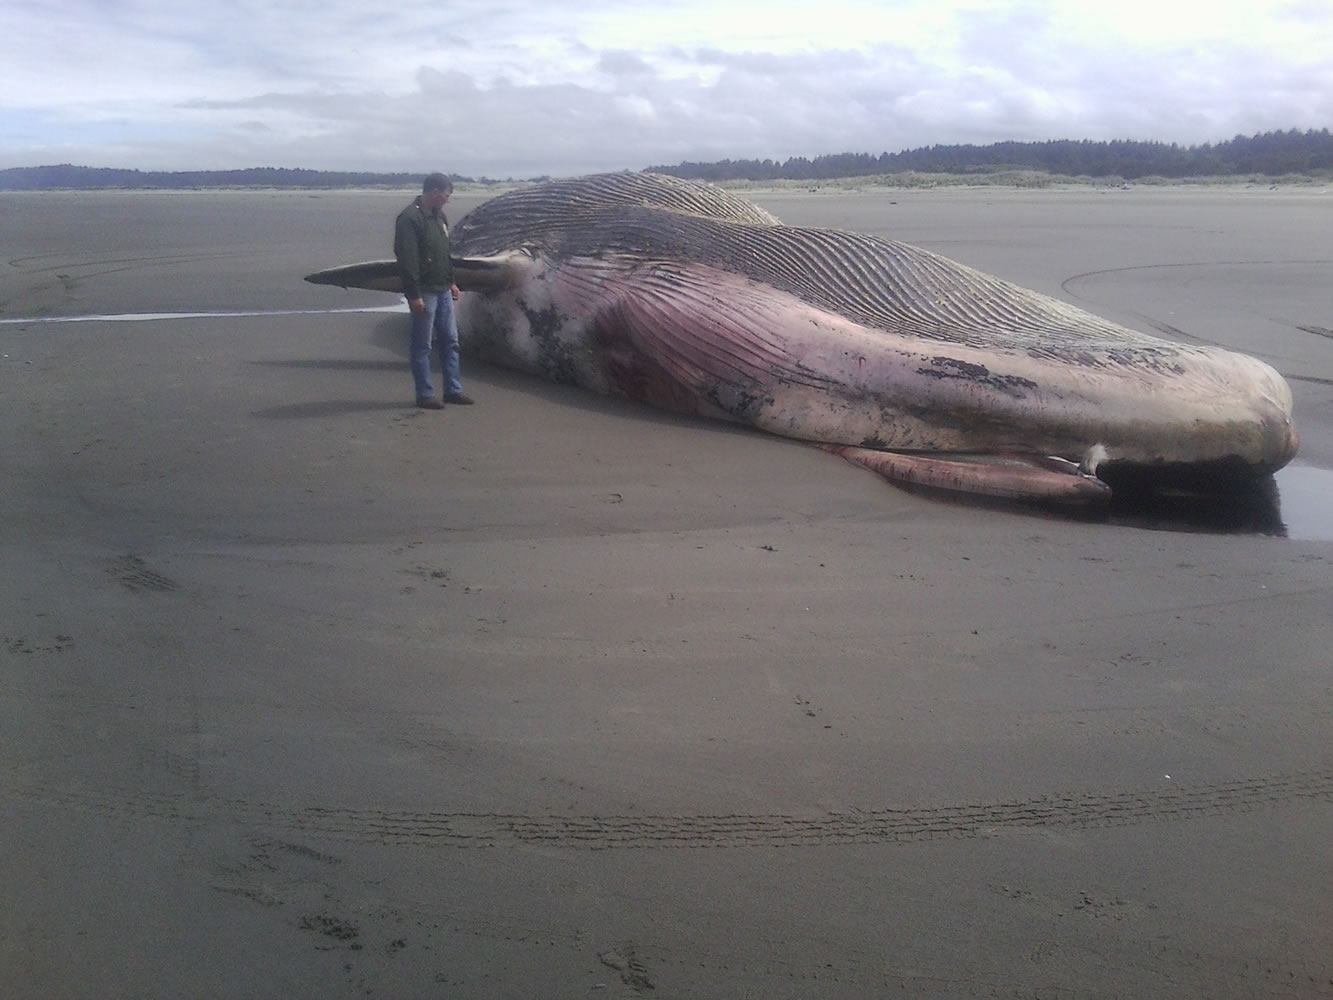 Washington Department of Fish and Wildlife Technician Clayton Parson stands next to a dead whale near Ocean Shores on Thursday.